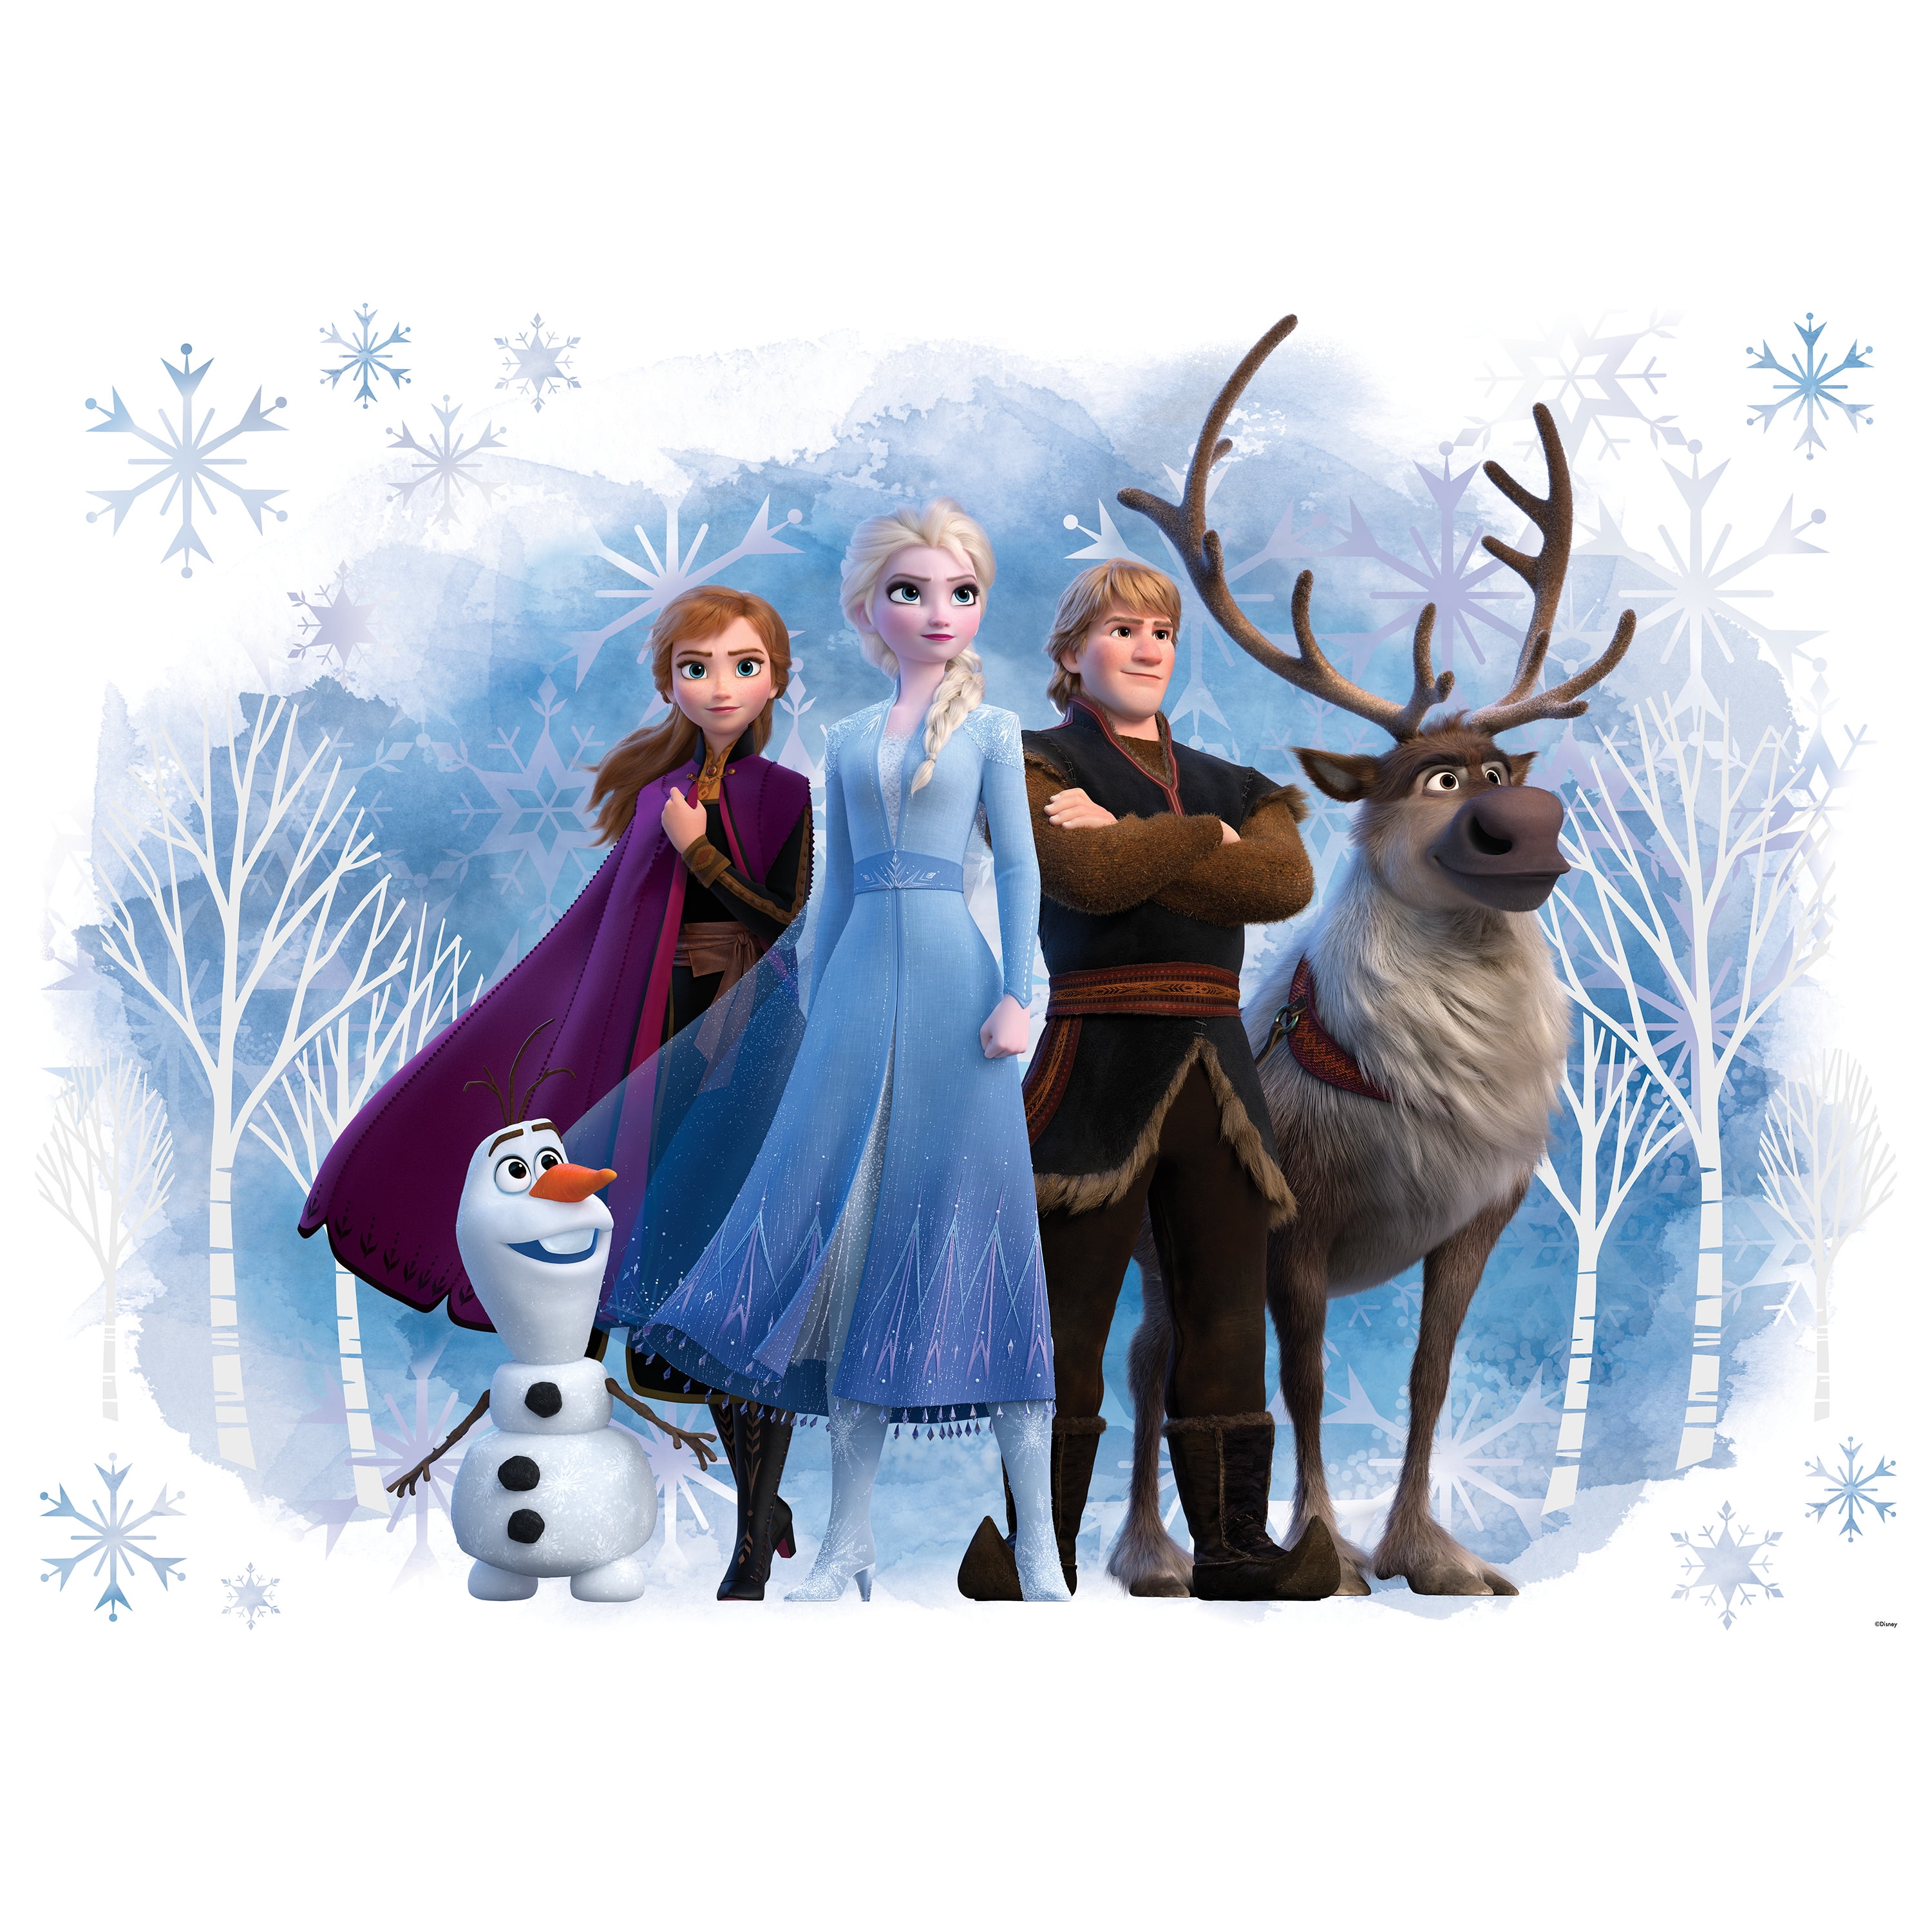 Disney Frozen Elsa Giant Peel and Stick Wall Decals by RoomMates, RMK2371GM